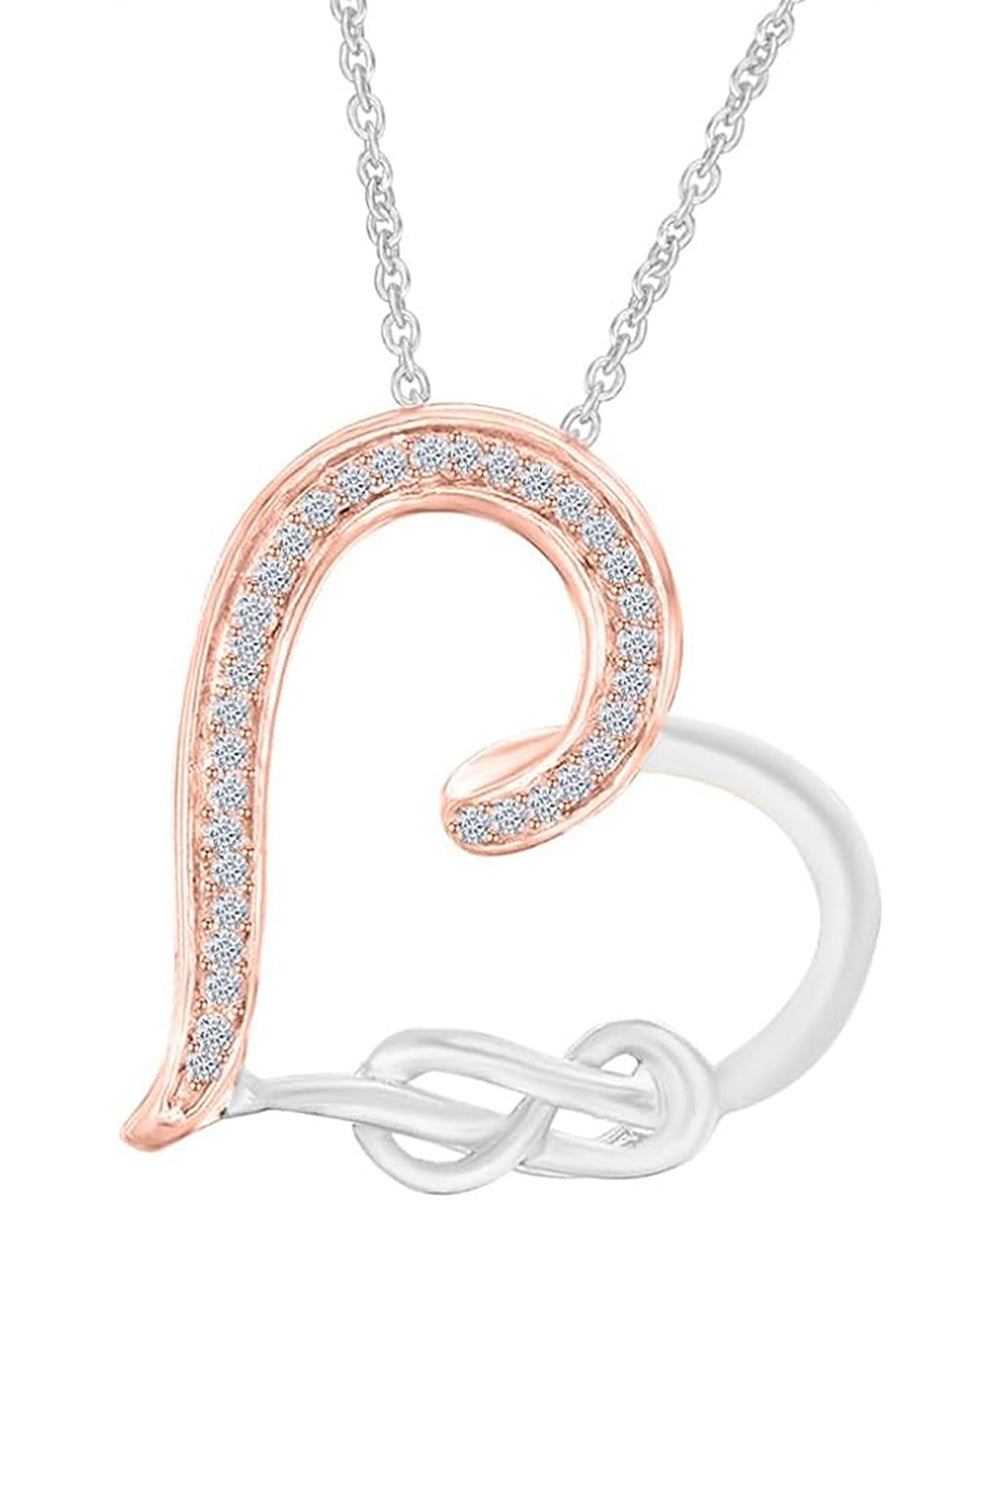 White Gold Color Infinity Knot Heart Pendant Necklace